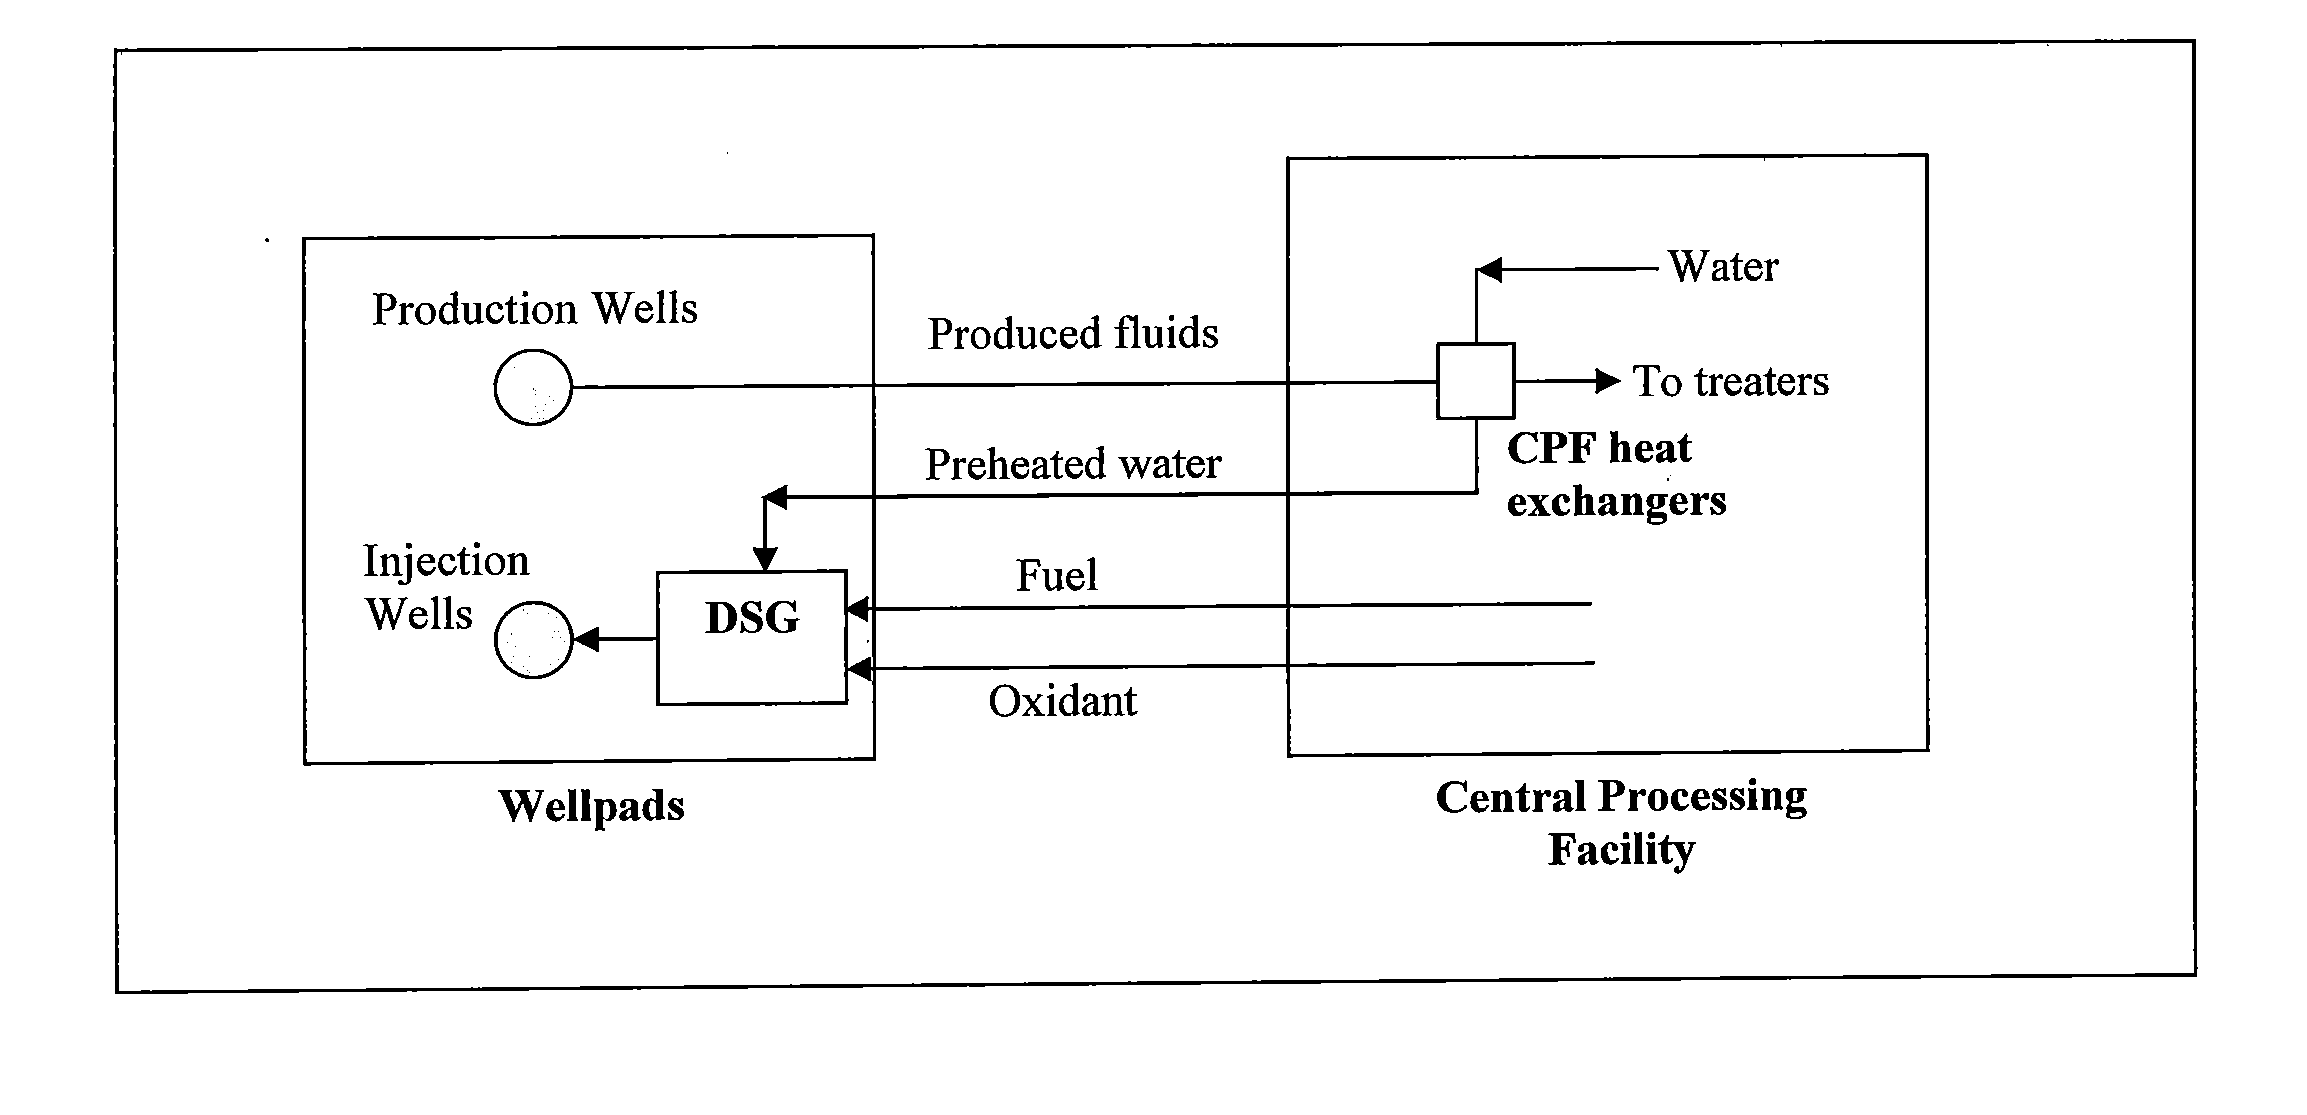 Heat recovery method for wellpad sagd steam generation